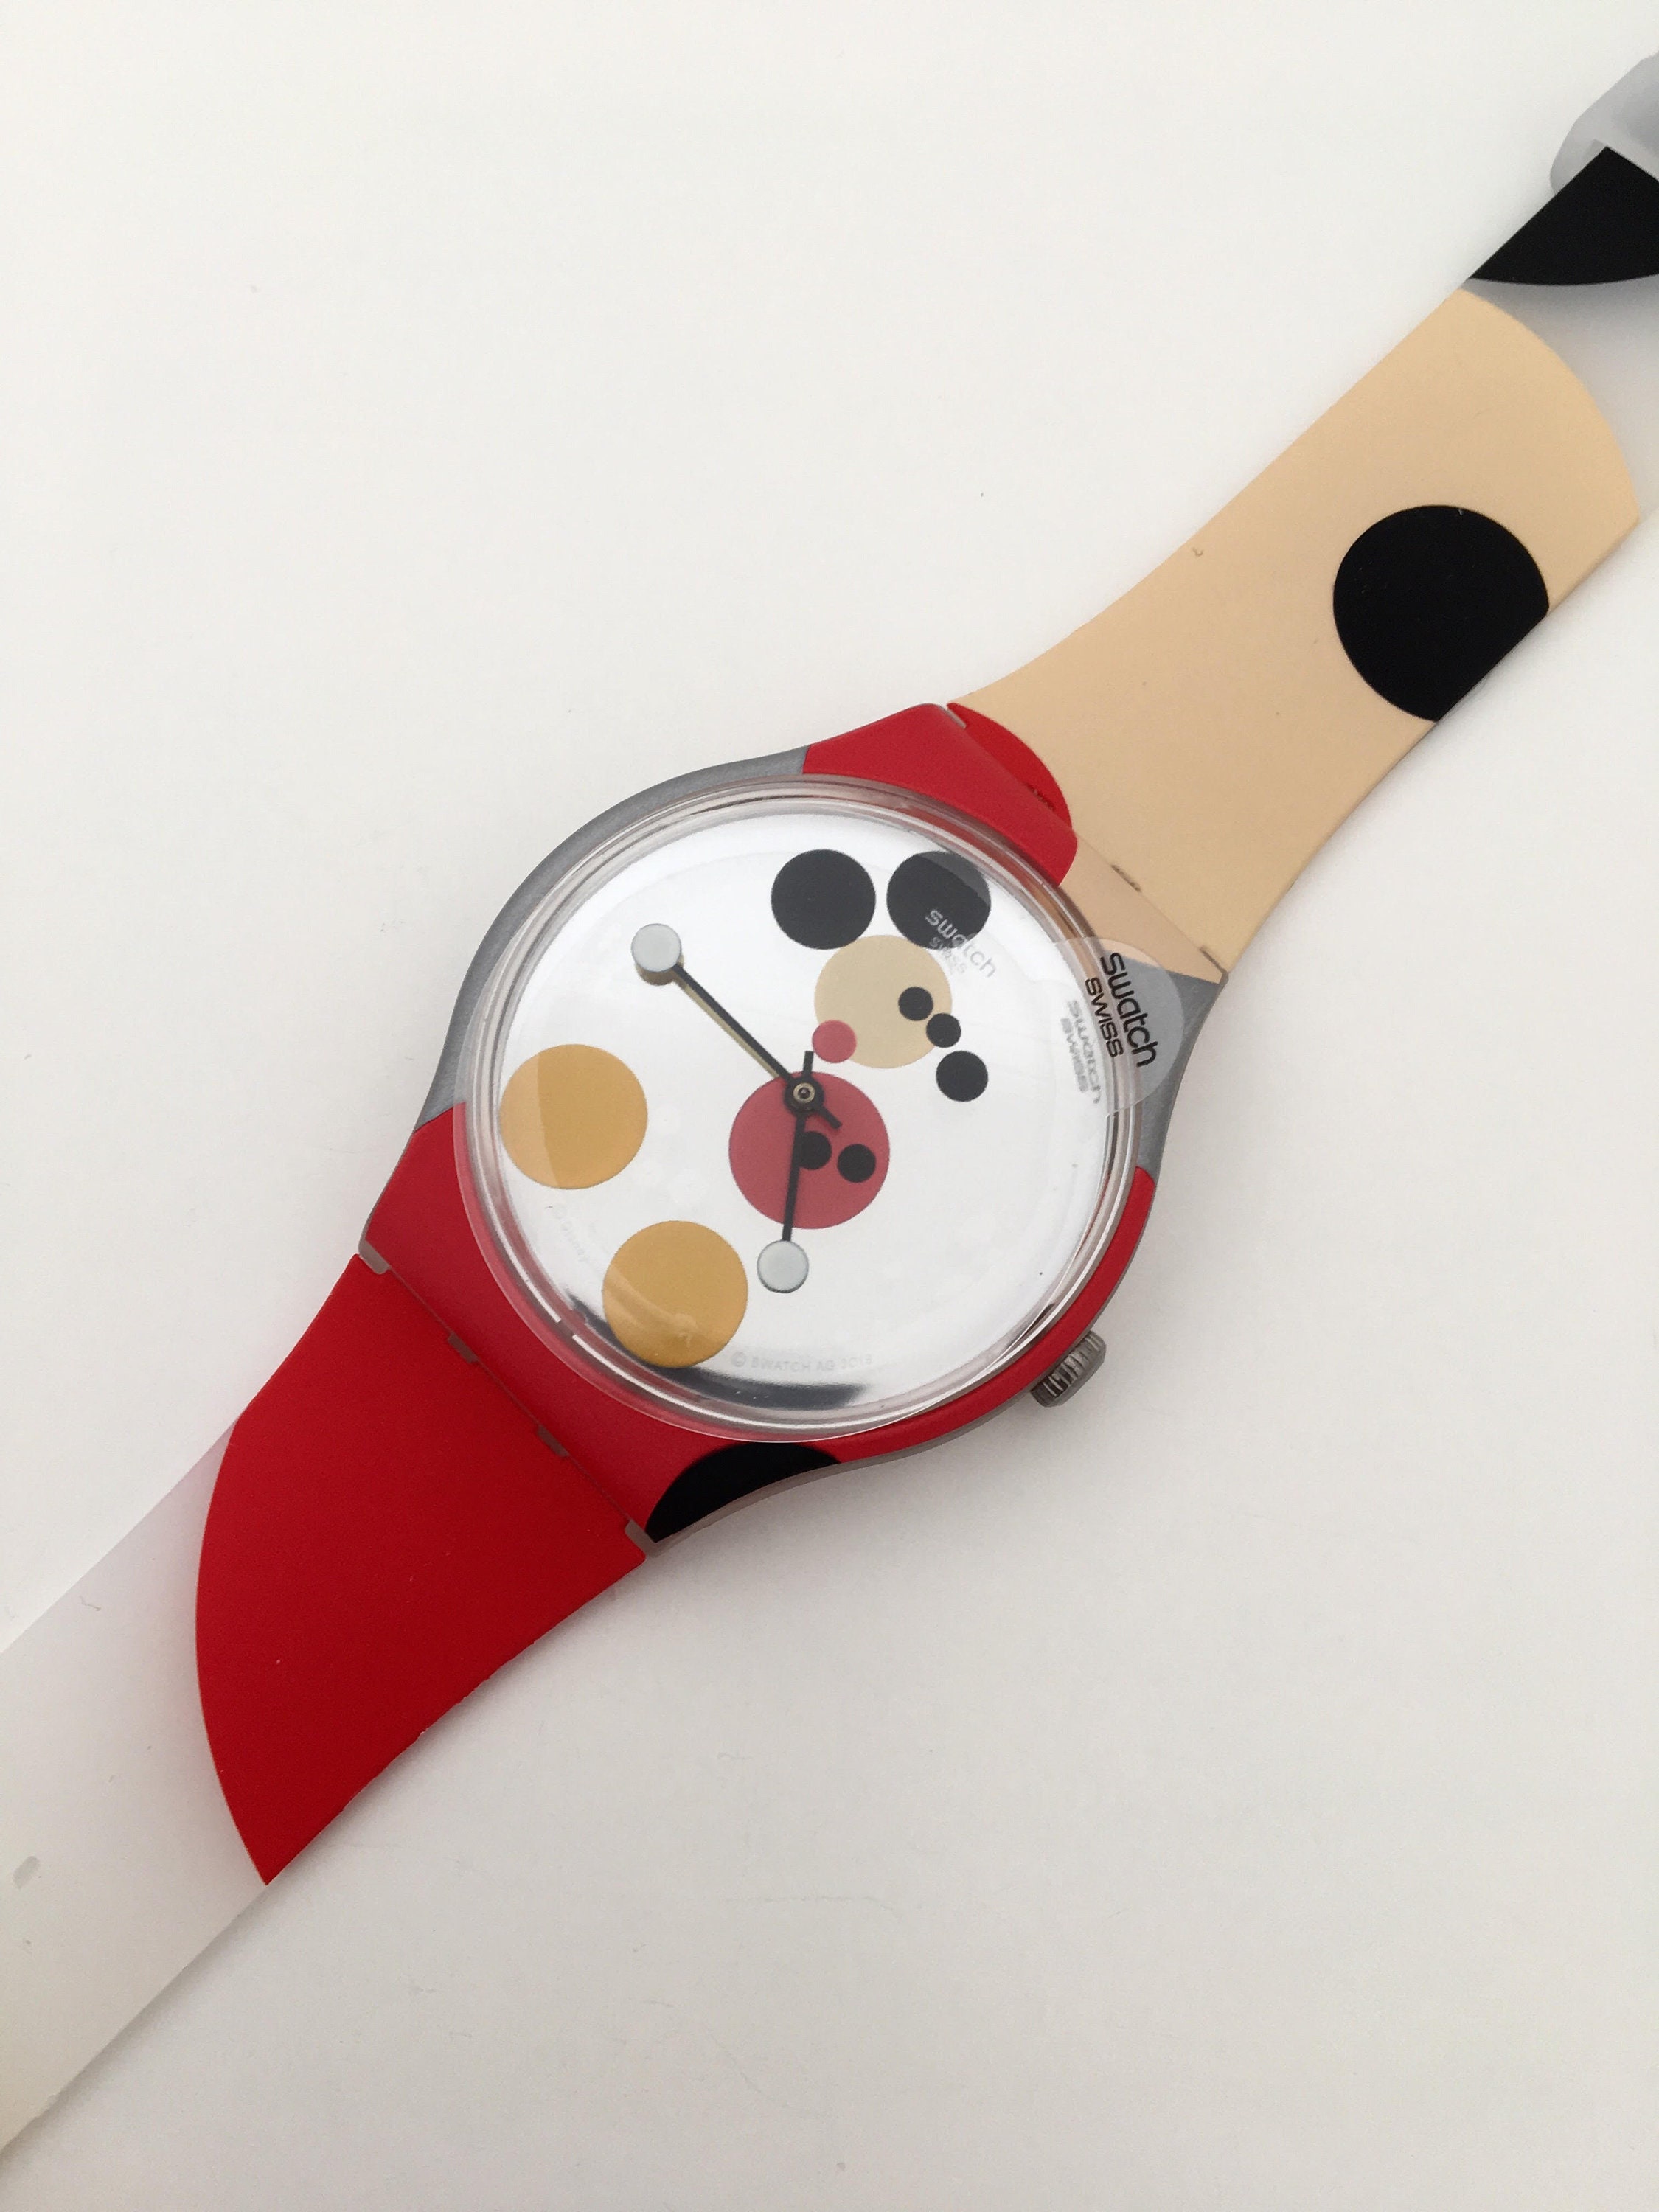 Swatch New Gent MIRROR SPOT MICKEY MOUSE